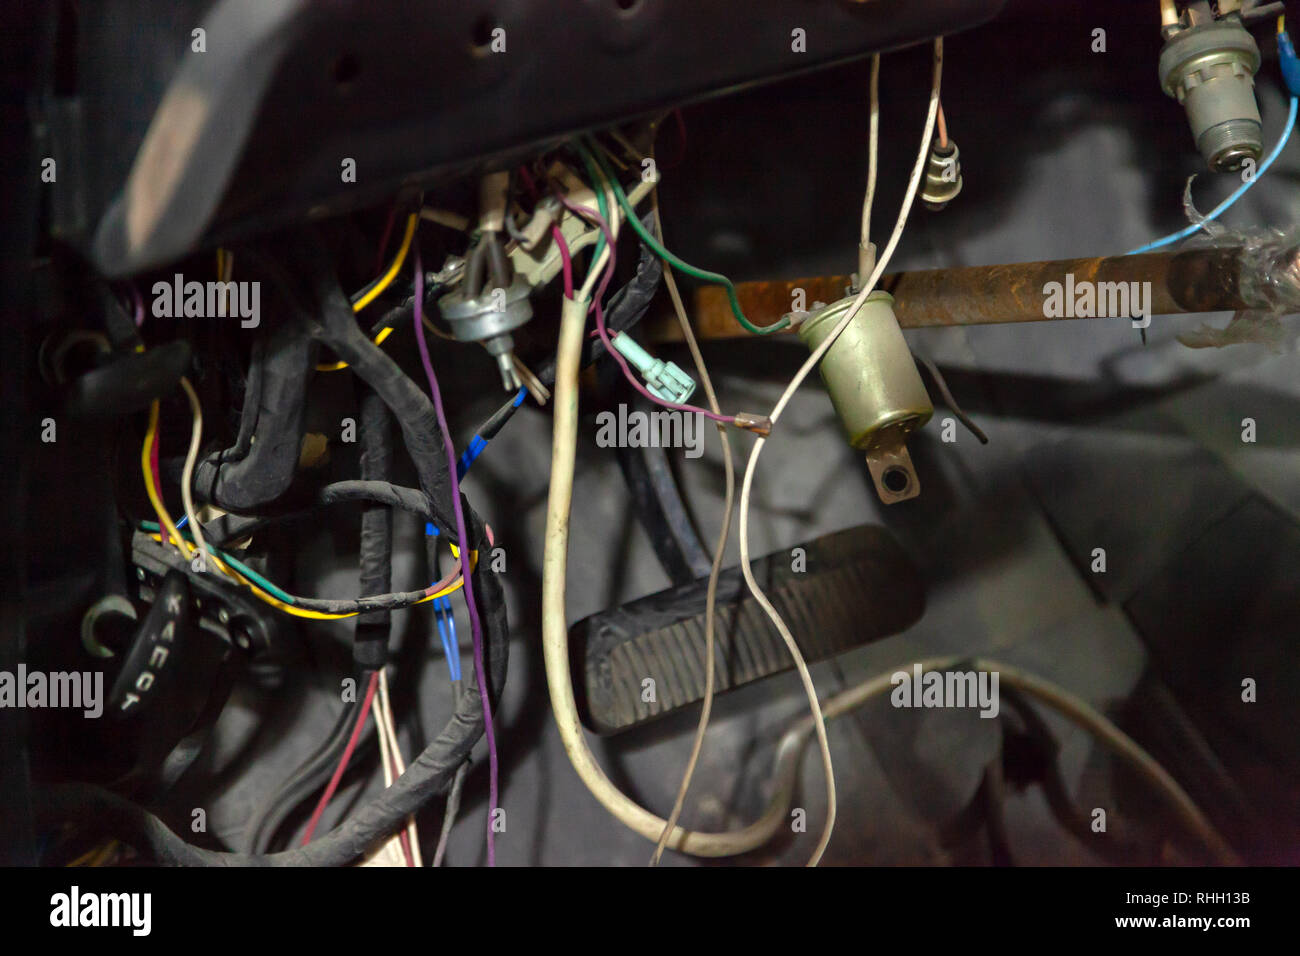 Novosibirsk, Russia - 01.30.2019: Automotive wiring of an old Russian car car gas 13 gul chaika under the dashboard for repairing and connecting elect Stock Photo